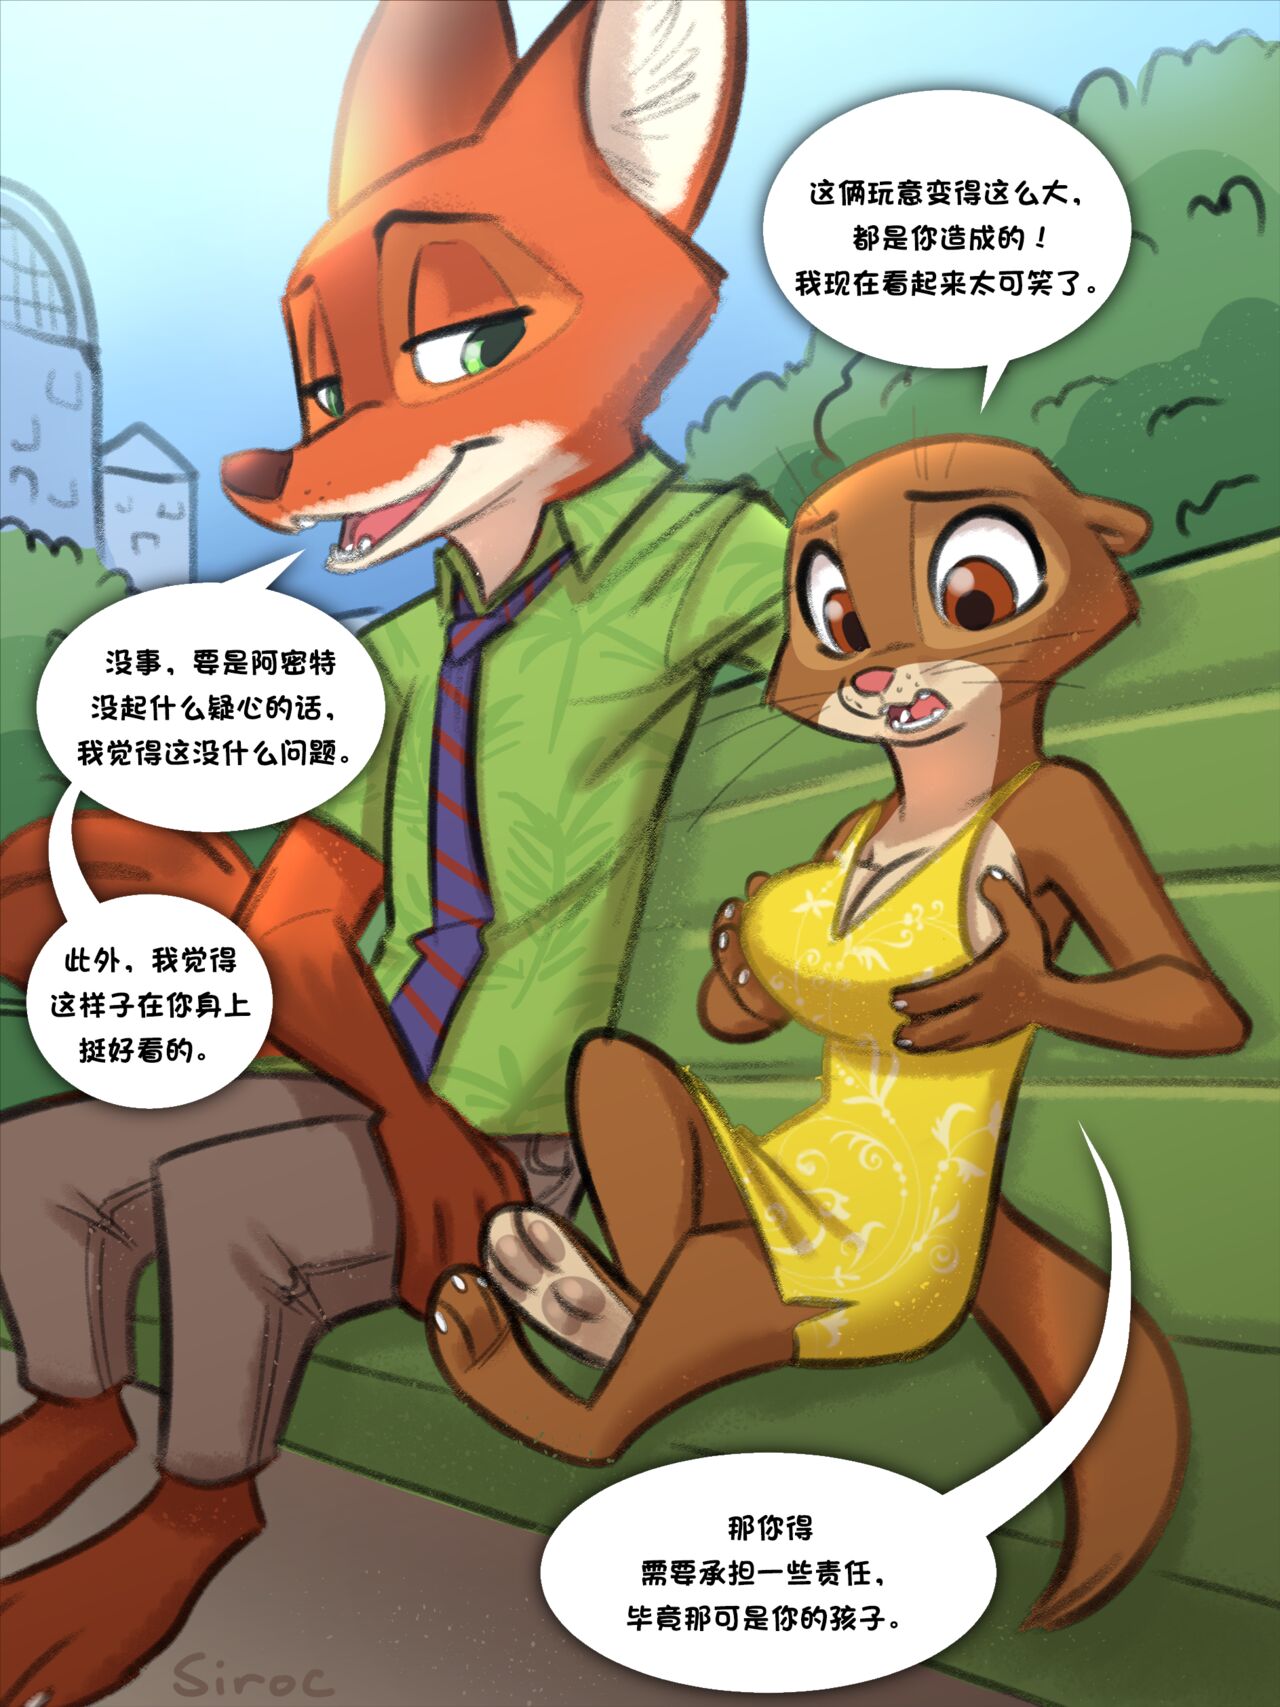 [Siroc] Operation Housecall (Zootopia)[w/Extras][chinese][DoreaMR233个人汉化] 